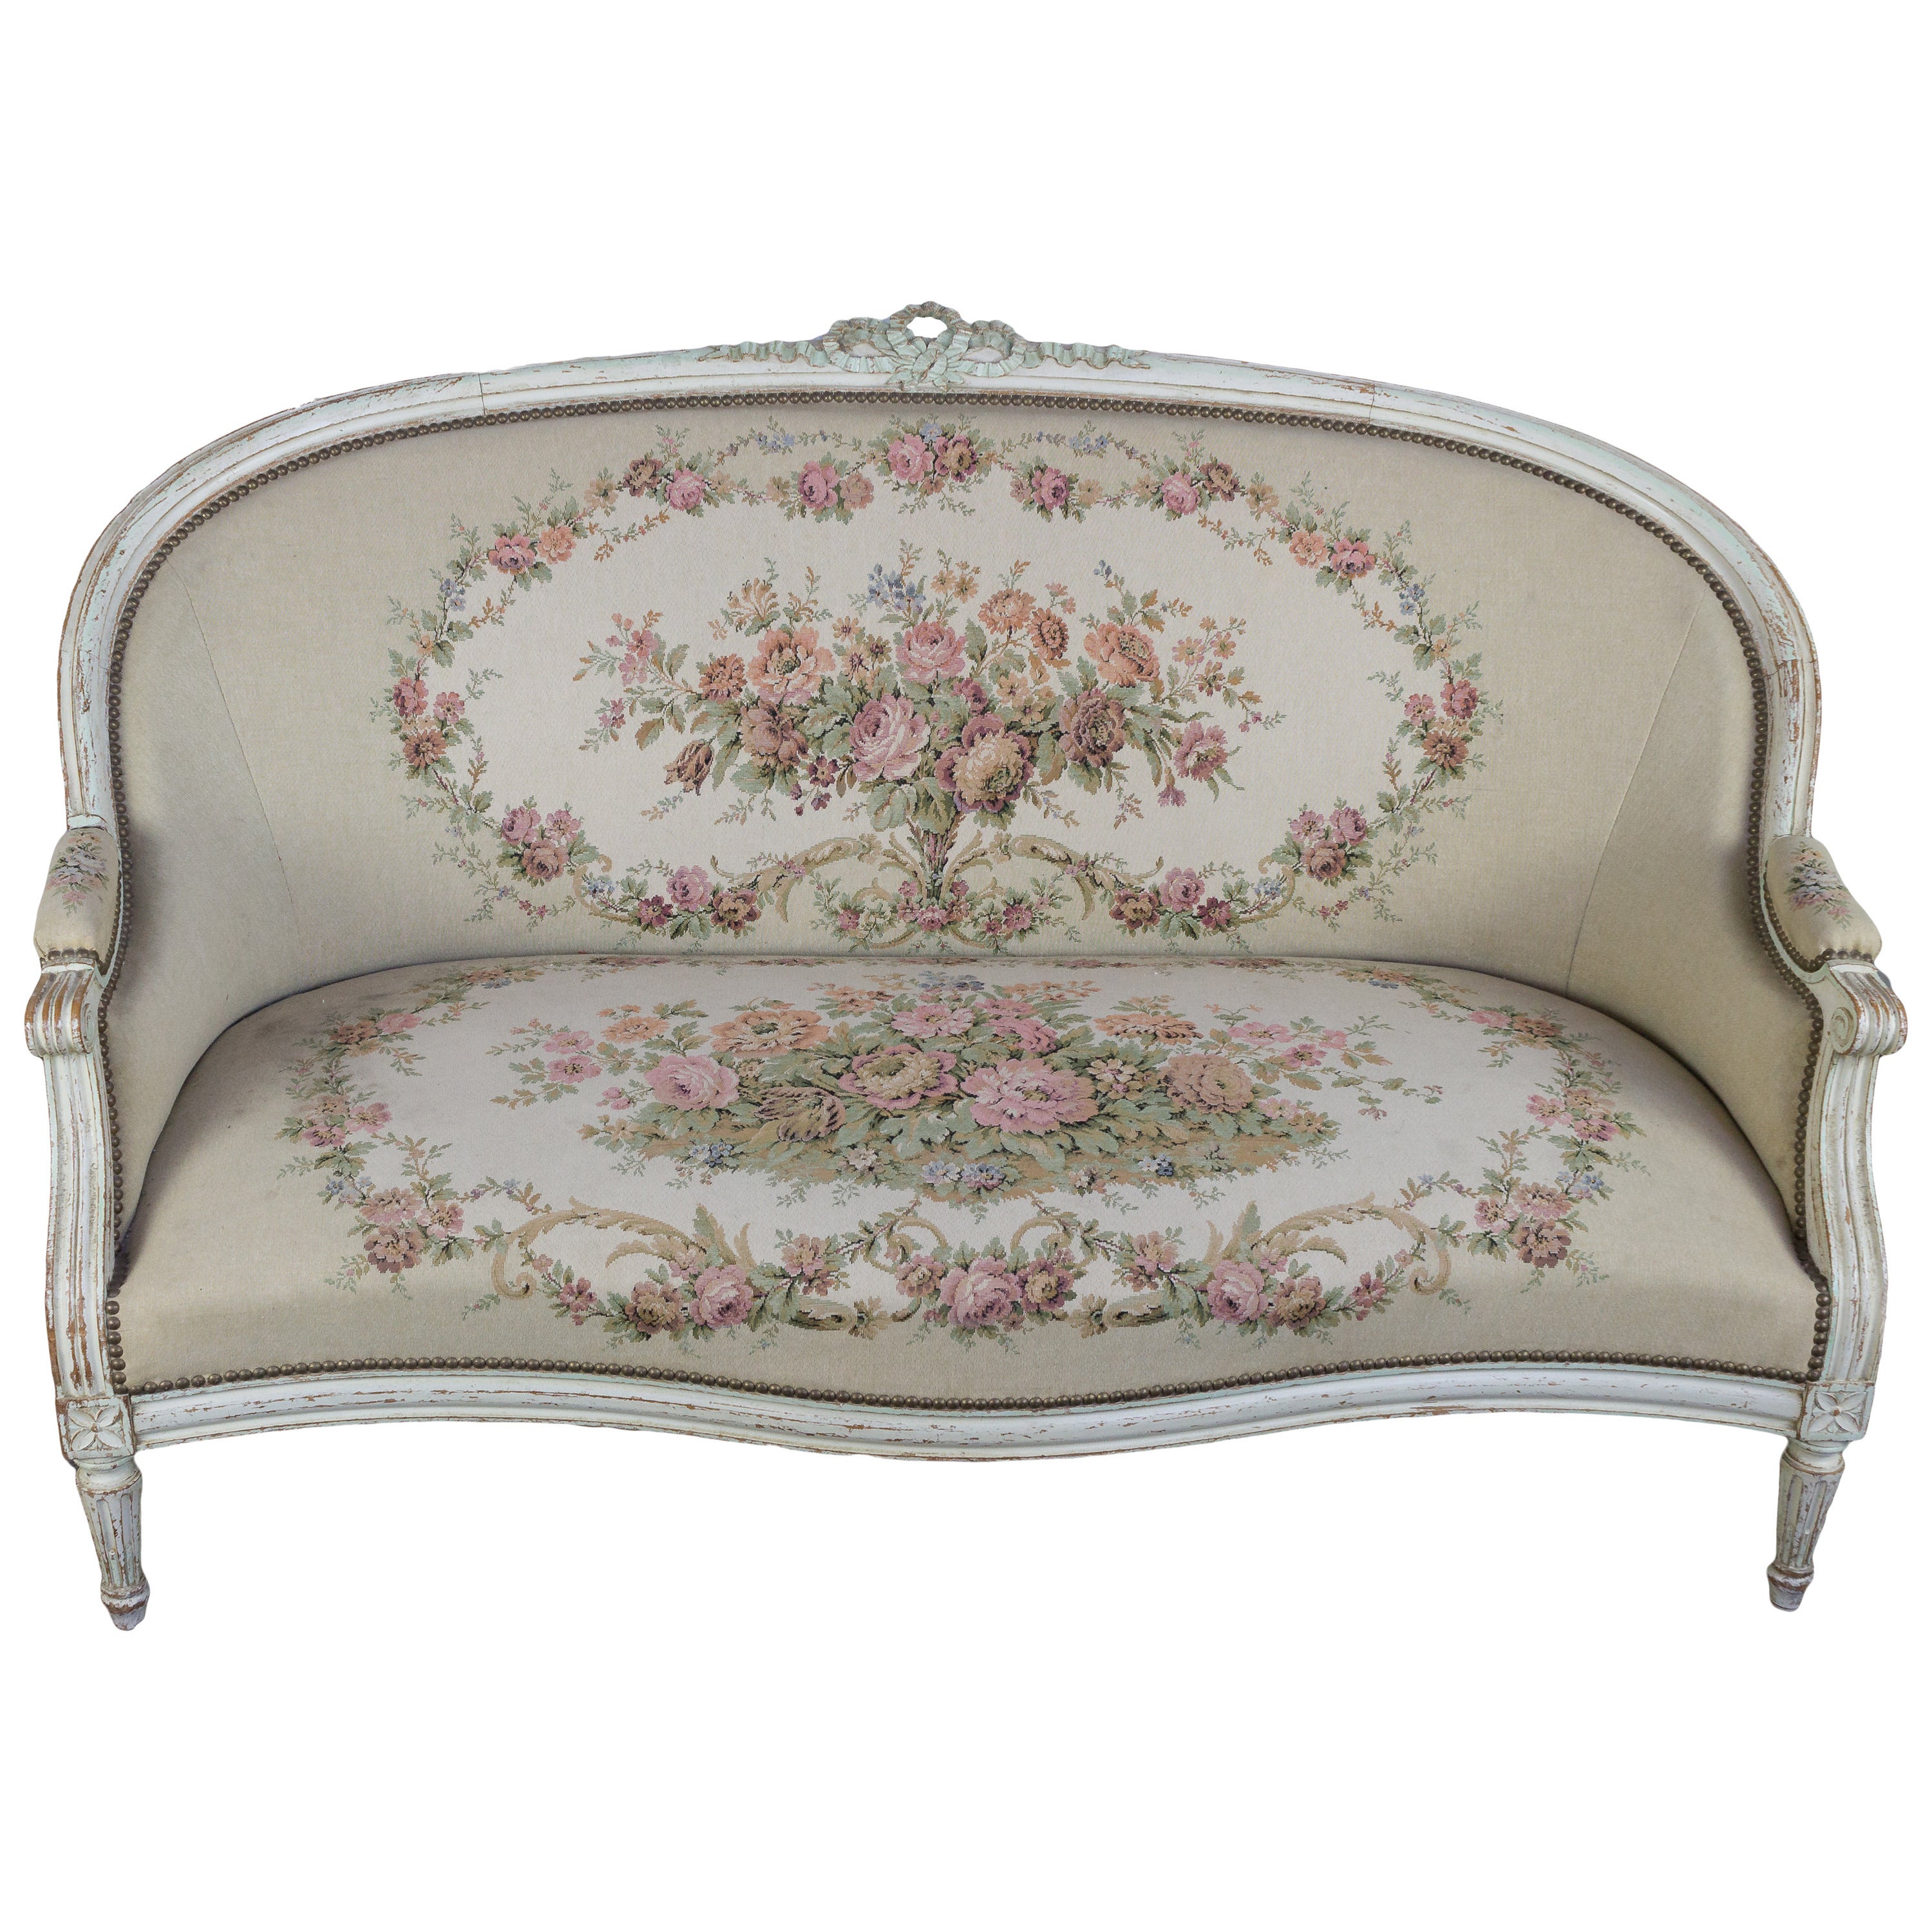 French Louis XVI Style Settee in Petit Point Fabric